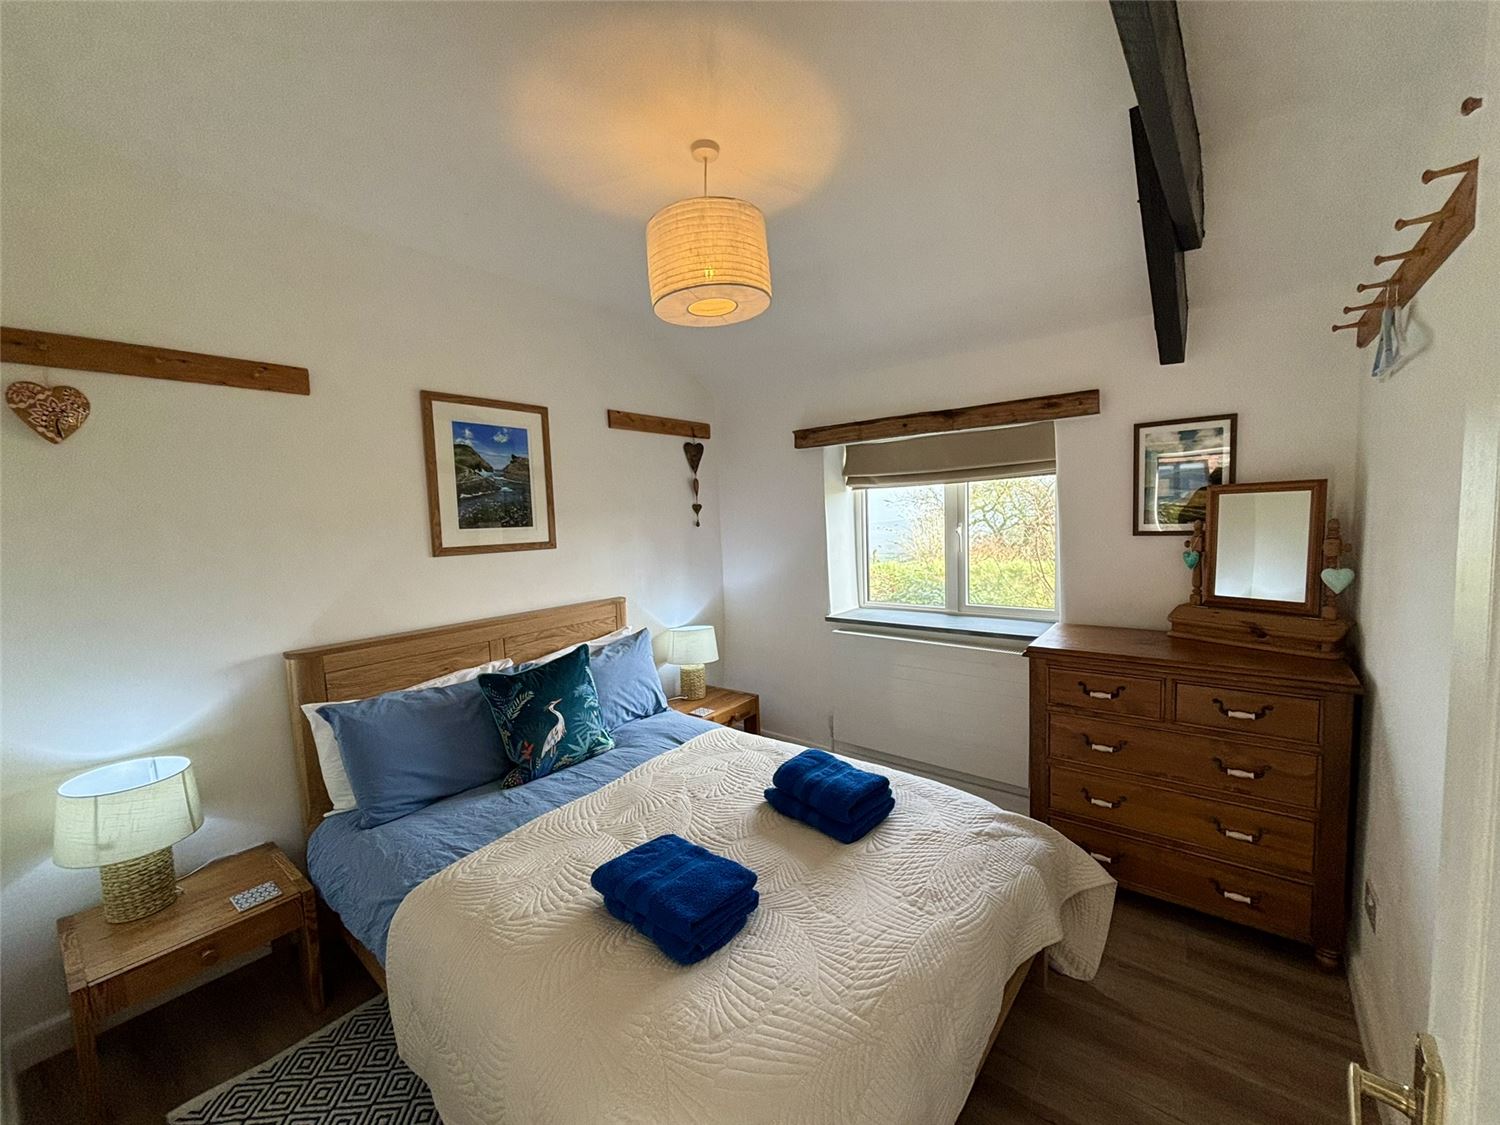 The light and airy double bedroom at Polrunny Farm's Seaberry Cottage, again with the sea view obliterated by the fog.